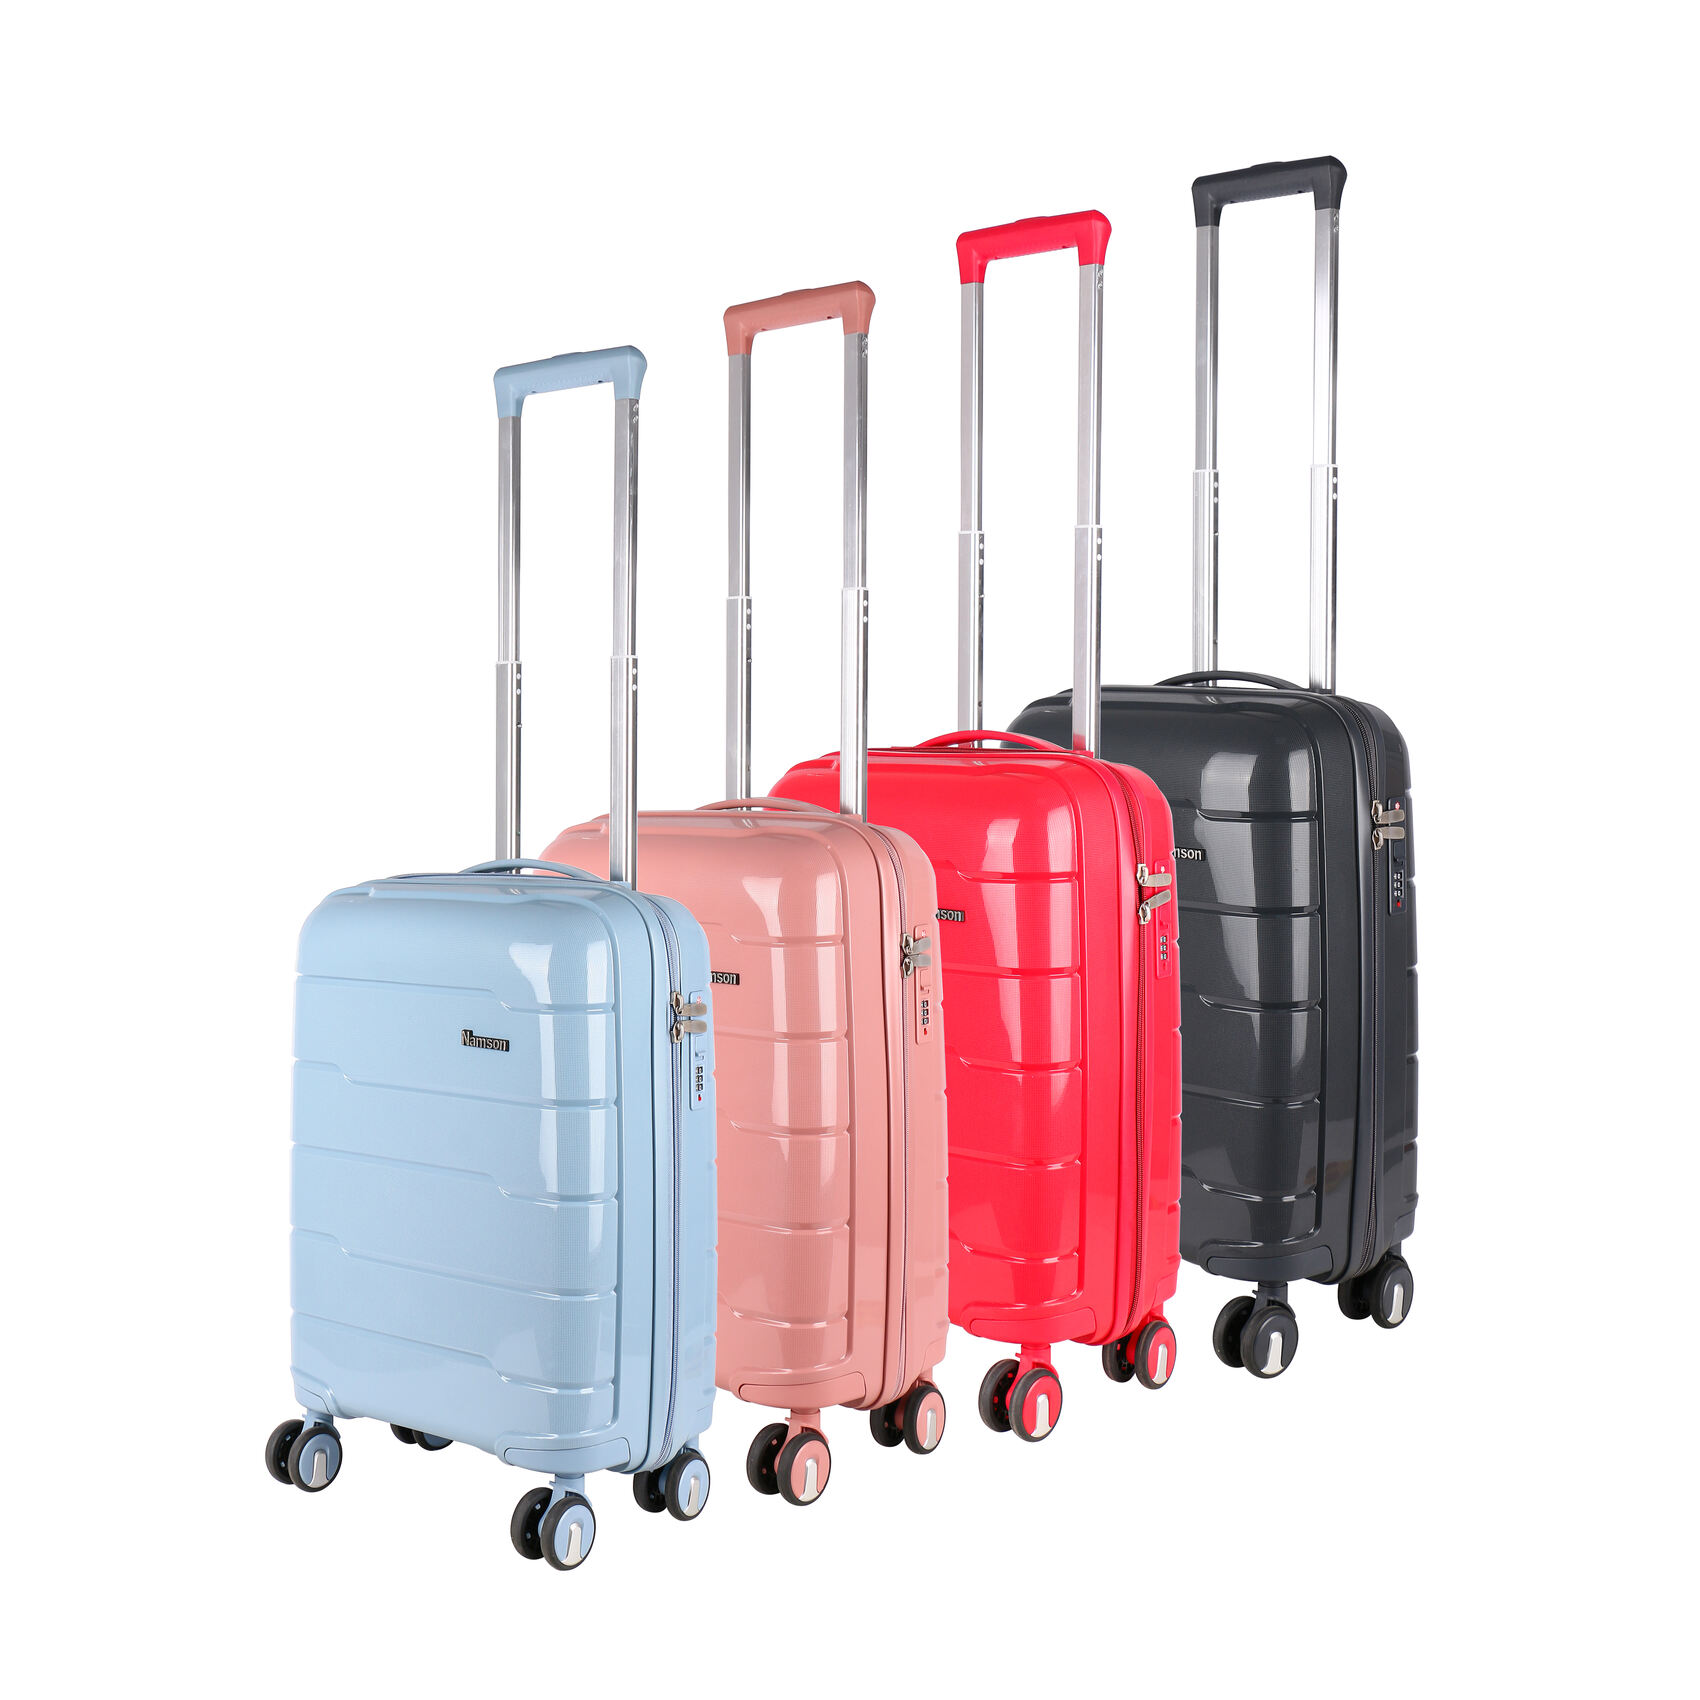 NAMSON 20 inch CABIN LUGGAGE TROLLEY SUITCASE 39L 7 - 10 KG WITH TELESCOPIC HANDLE NA-7867-20 | LIGHT WEIGHT WATER RESISTANT | PREMIUM QUALITY | FLEXIBLE | 360 SPINNING 8 WHEELS | NON BREAKABLE | DOUBLE ZIPPER | MULTIPLE LOCKING SYSTEM